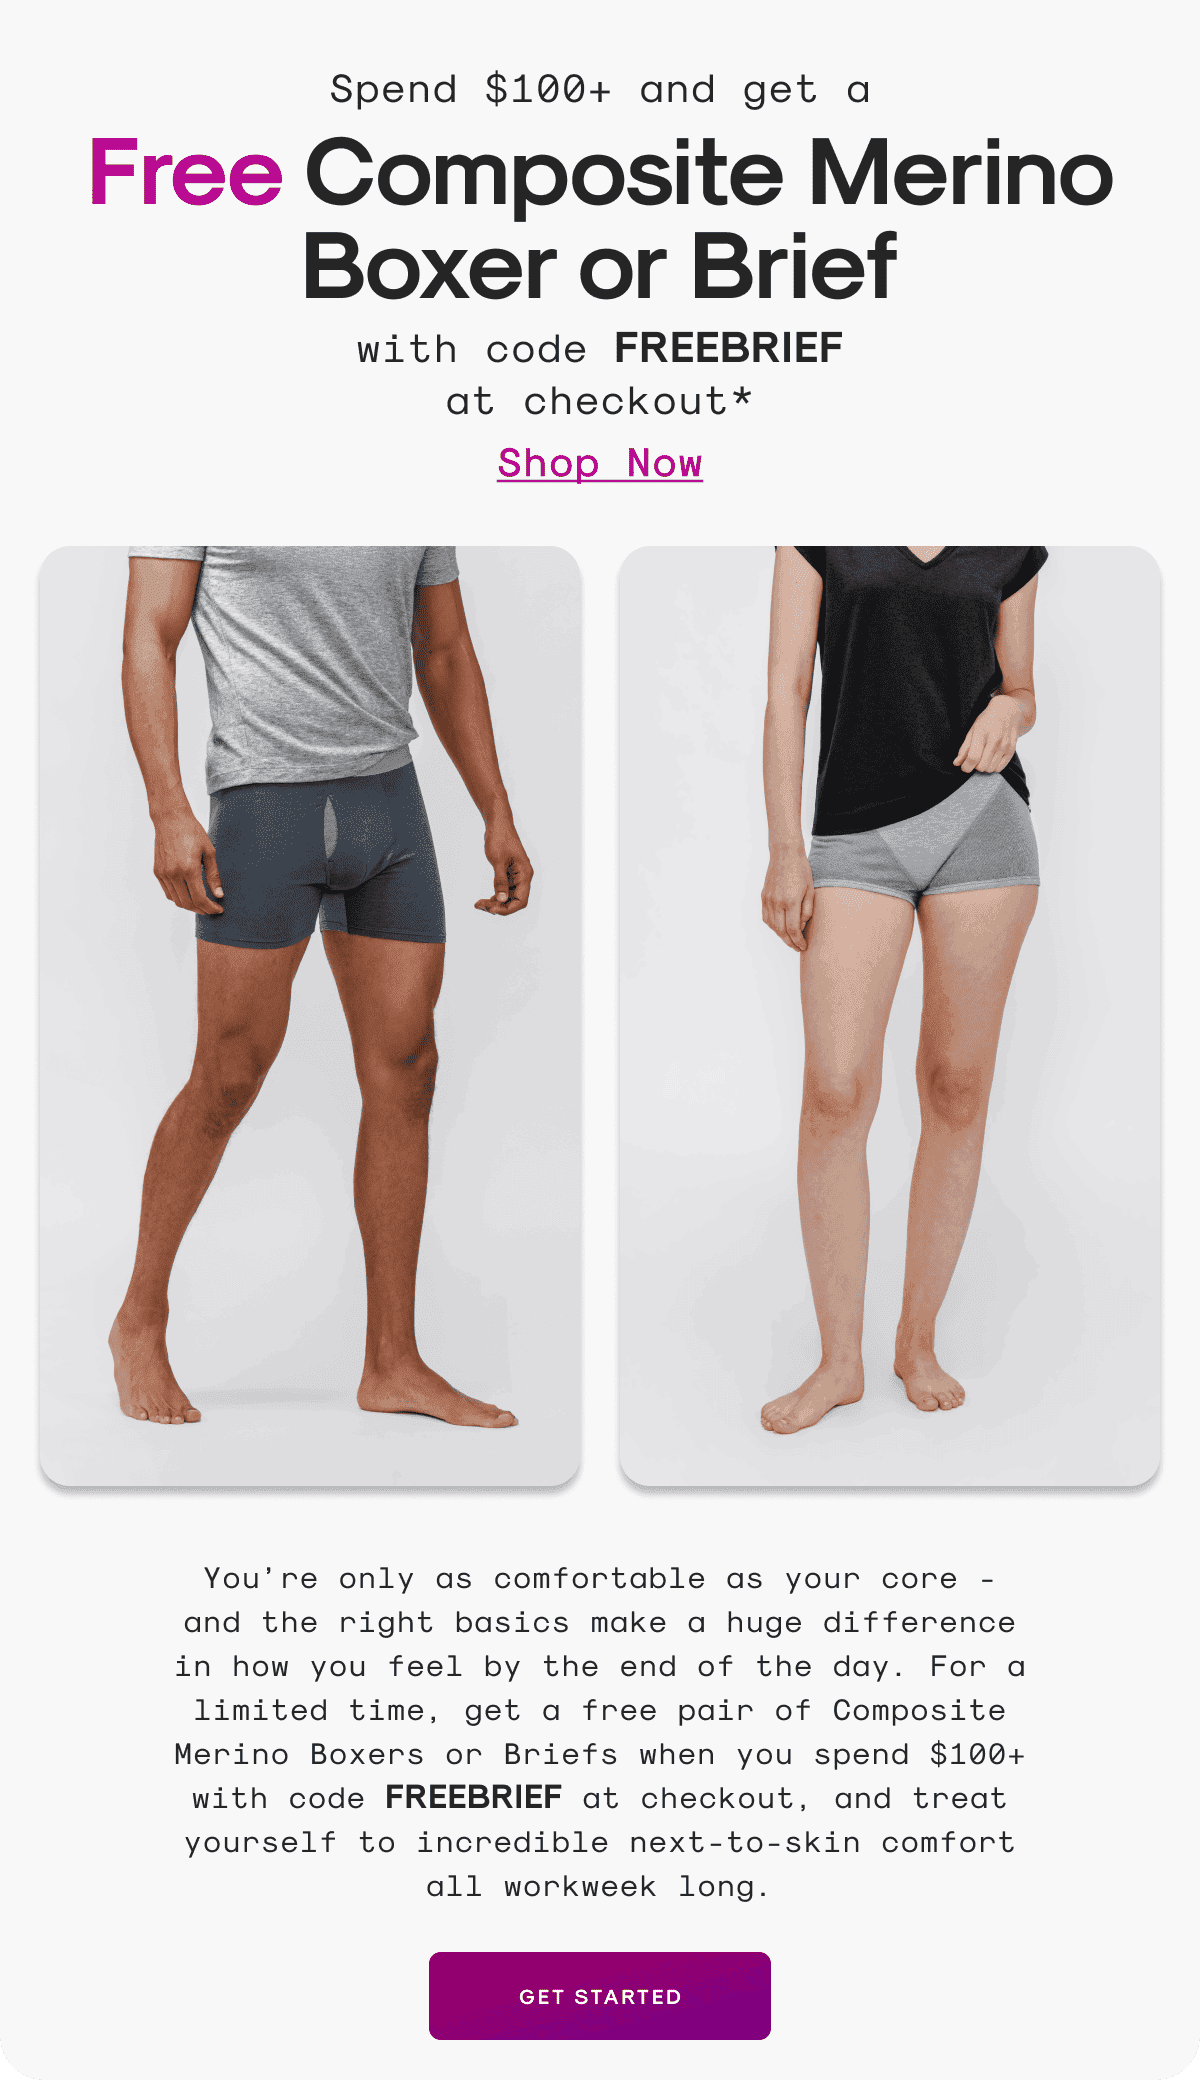 Spend \\$100+ and get a Free Composite Merino Boxer or Brief with code FREEBRIEF at checkout*